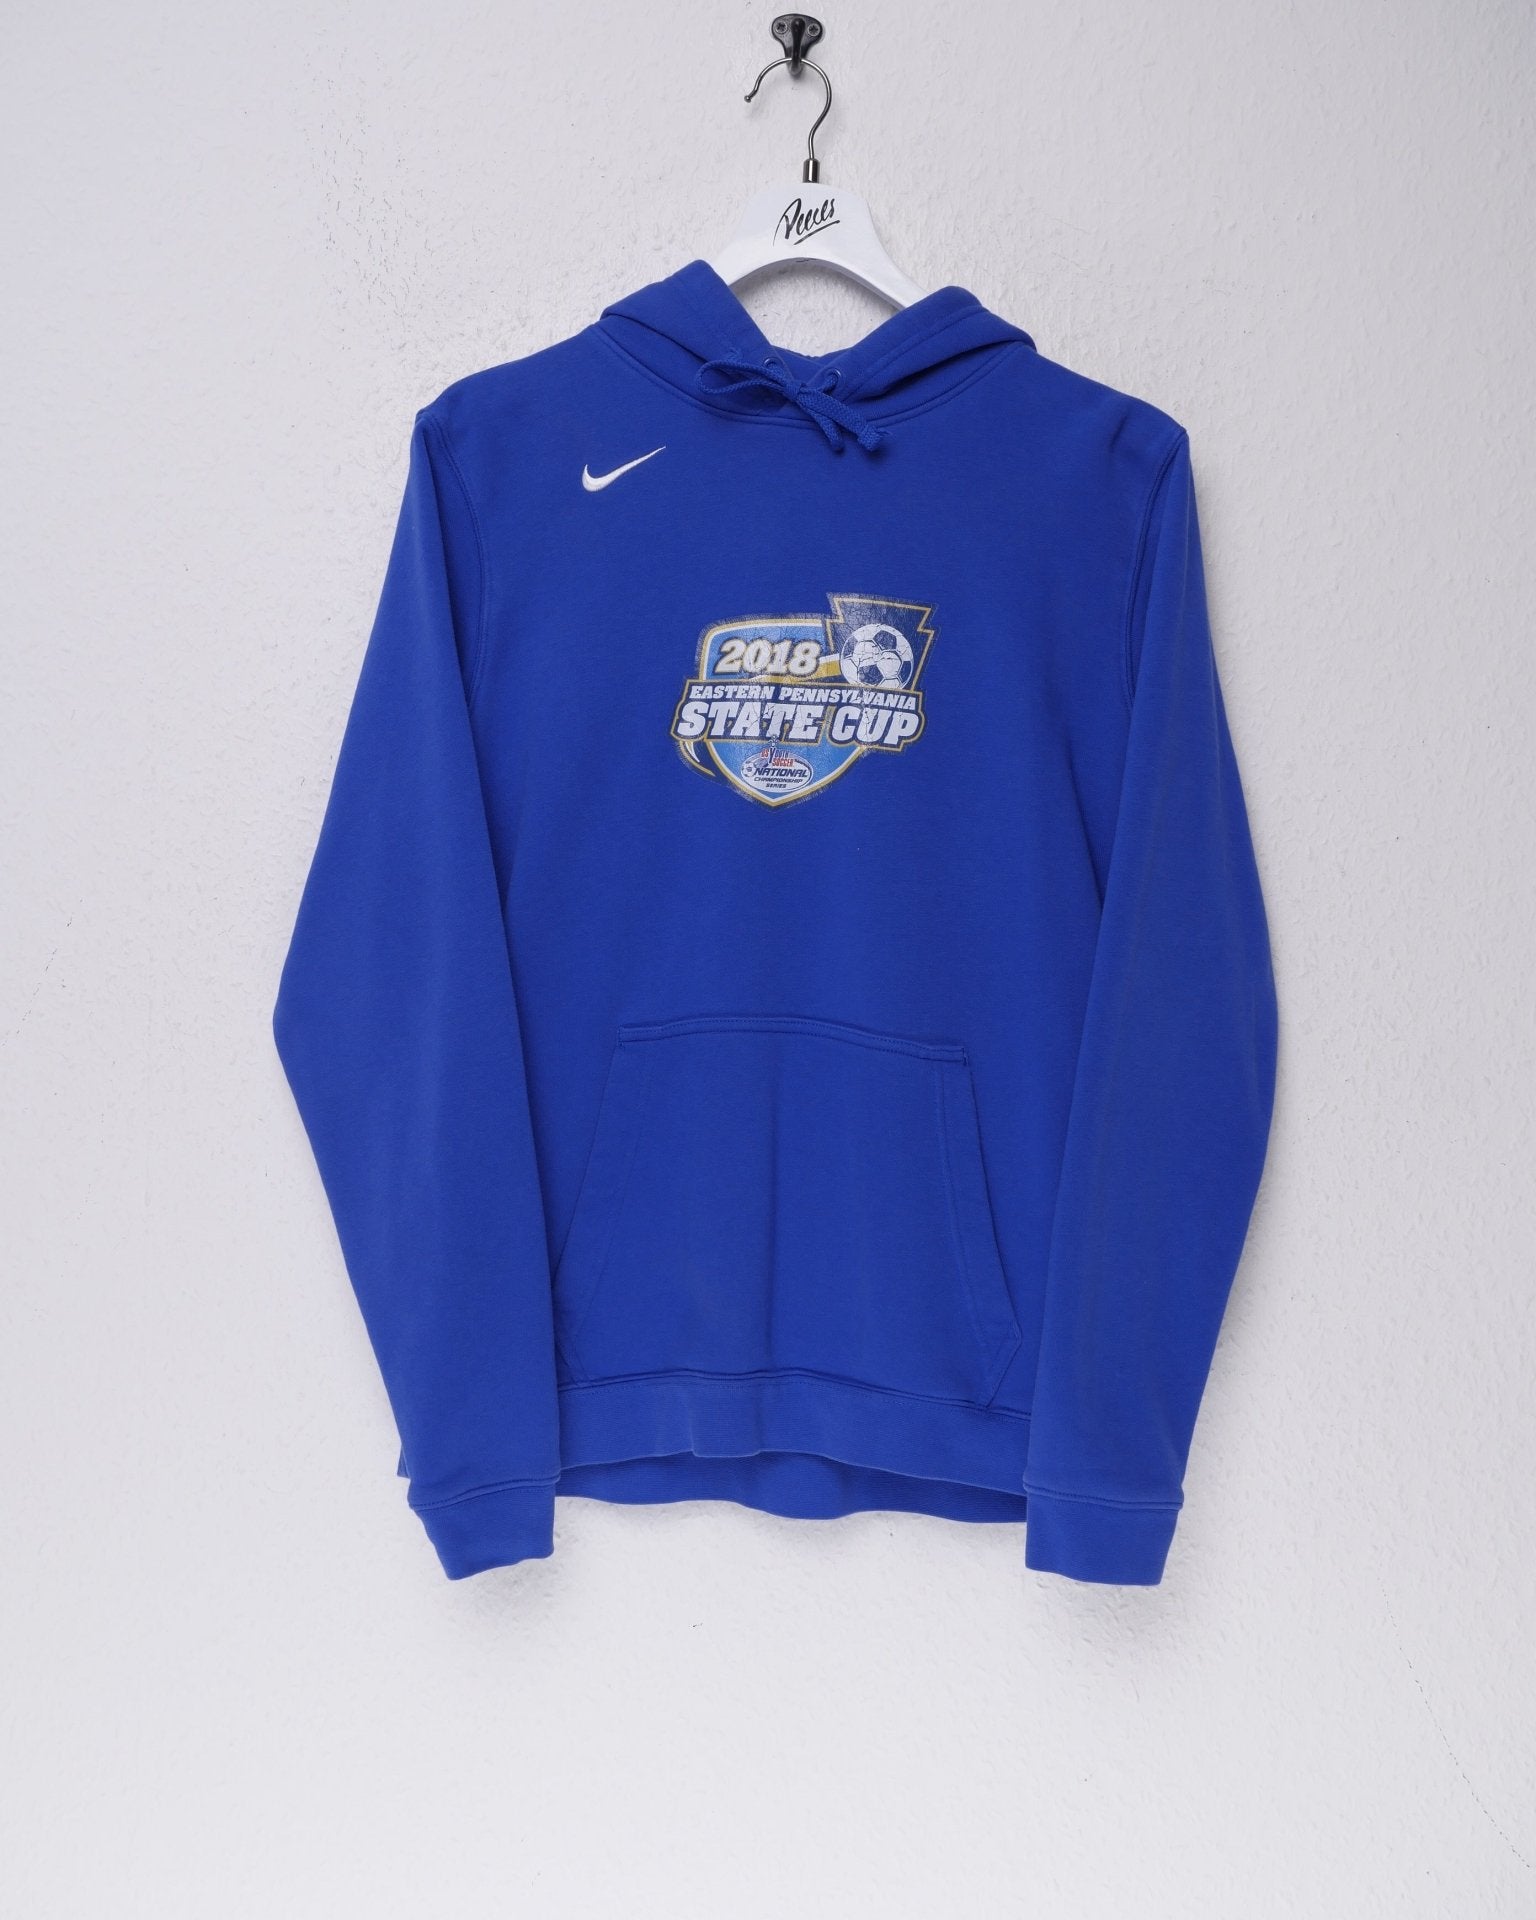 Nike embroidered Swoosh 'Eastern Pennsylvania State Cup' printed blue Hoodie - Peeces